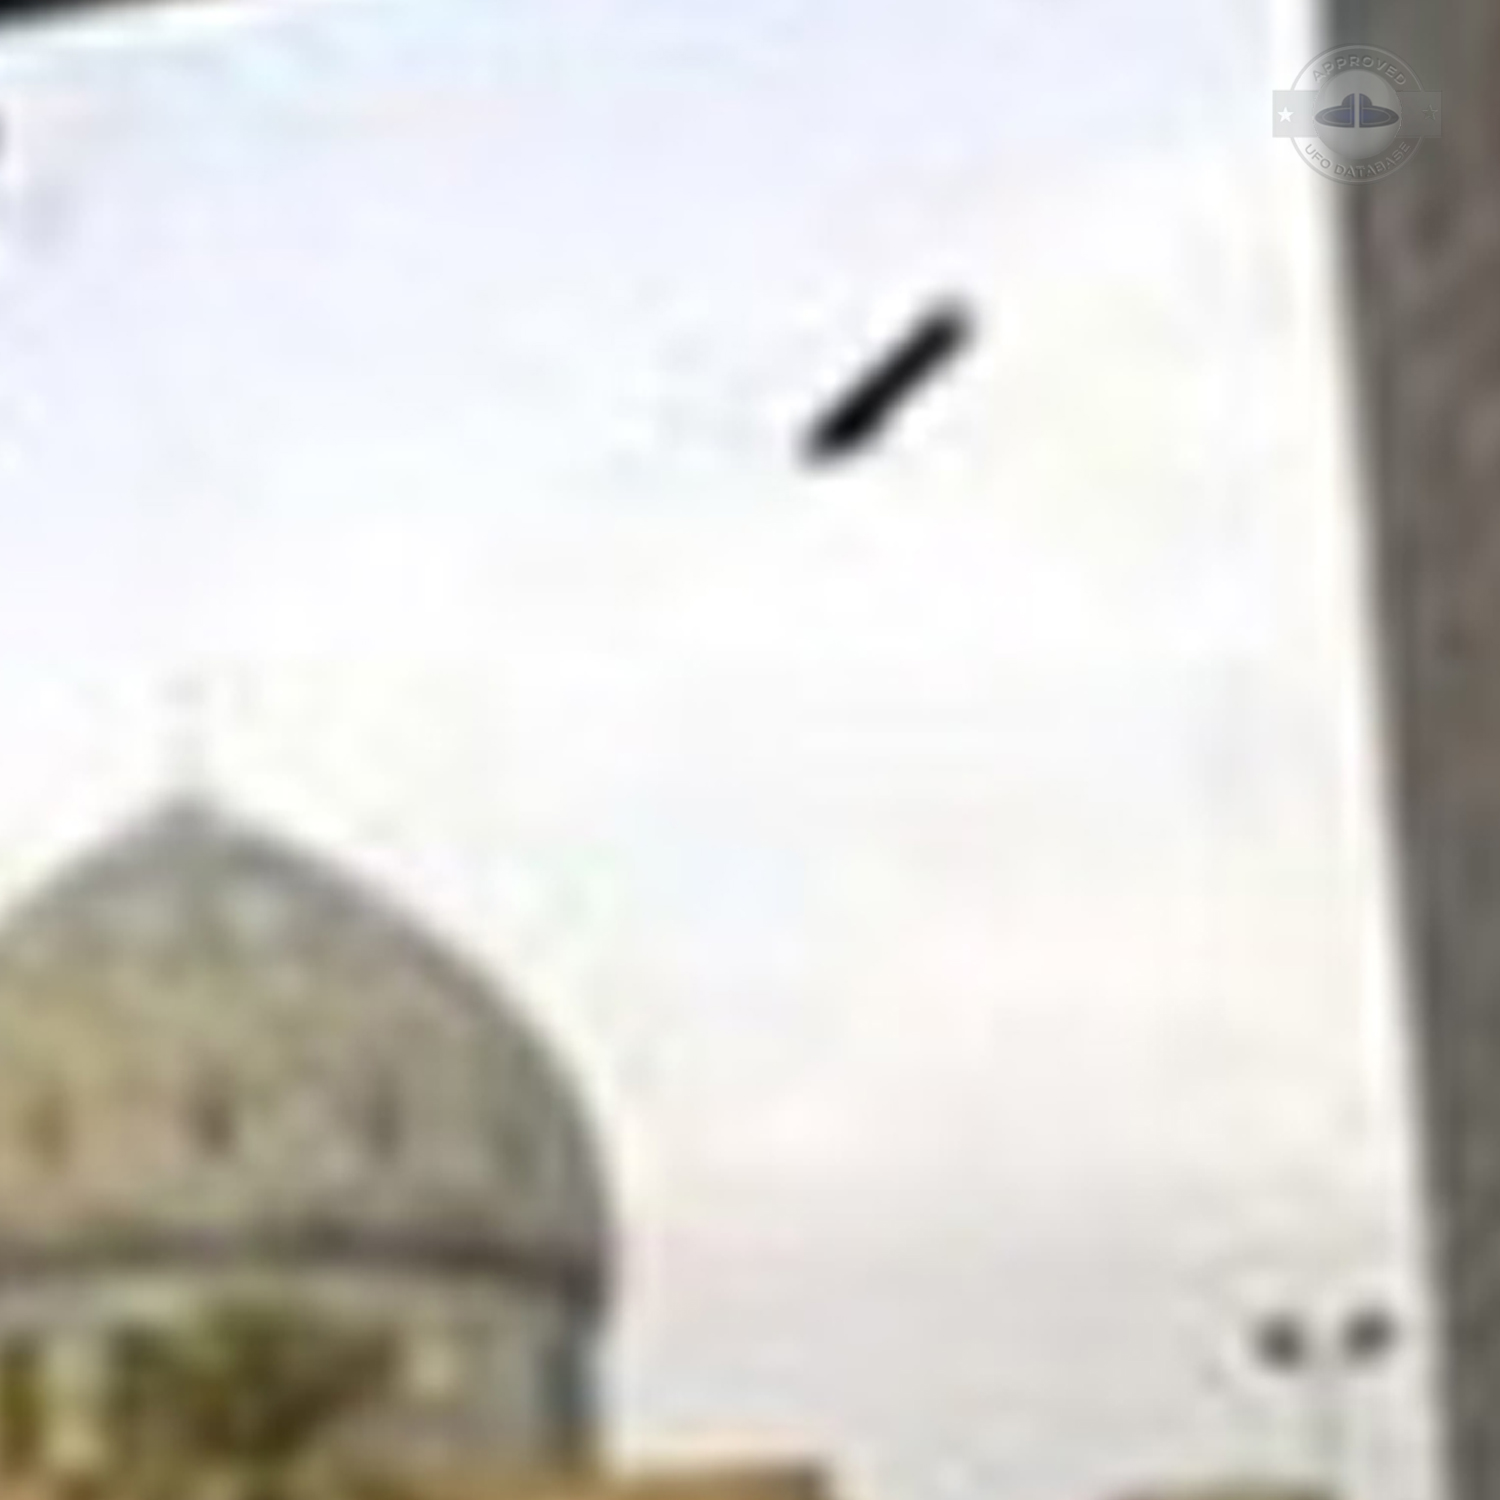 UFO Picture taken while Saddam Hussein statue is falling | Baghdad UFO Picture #183-4